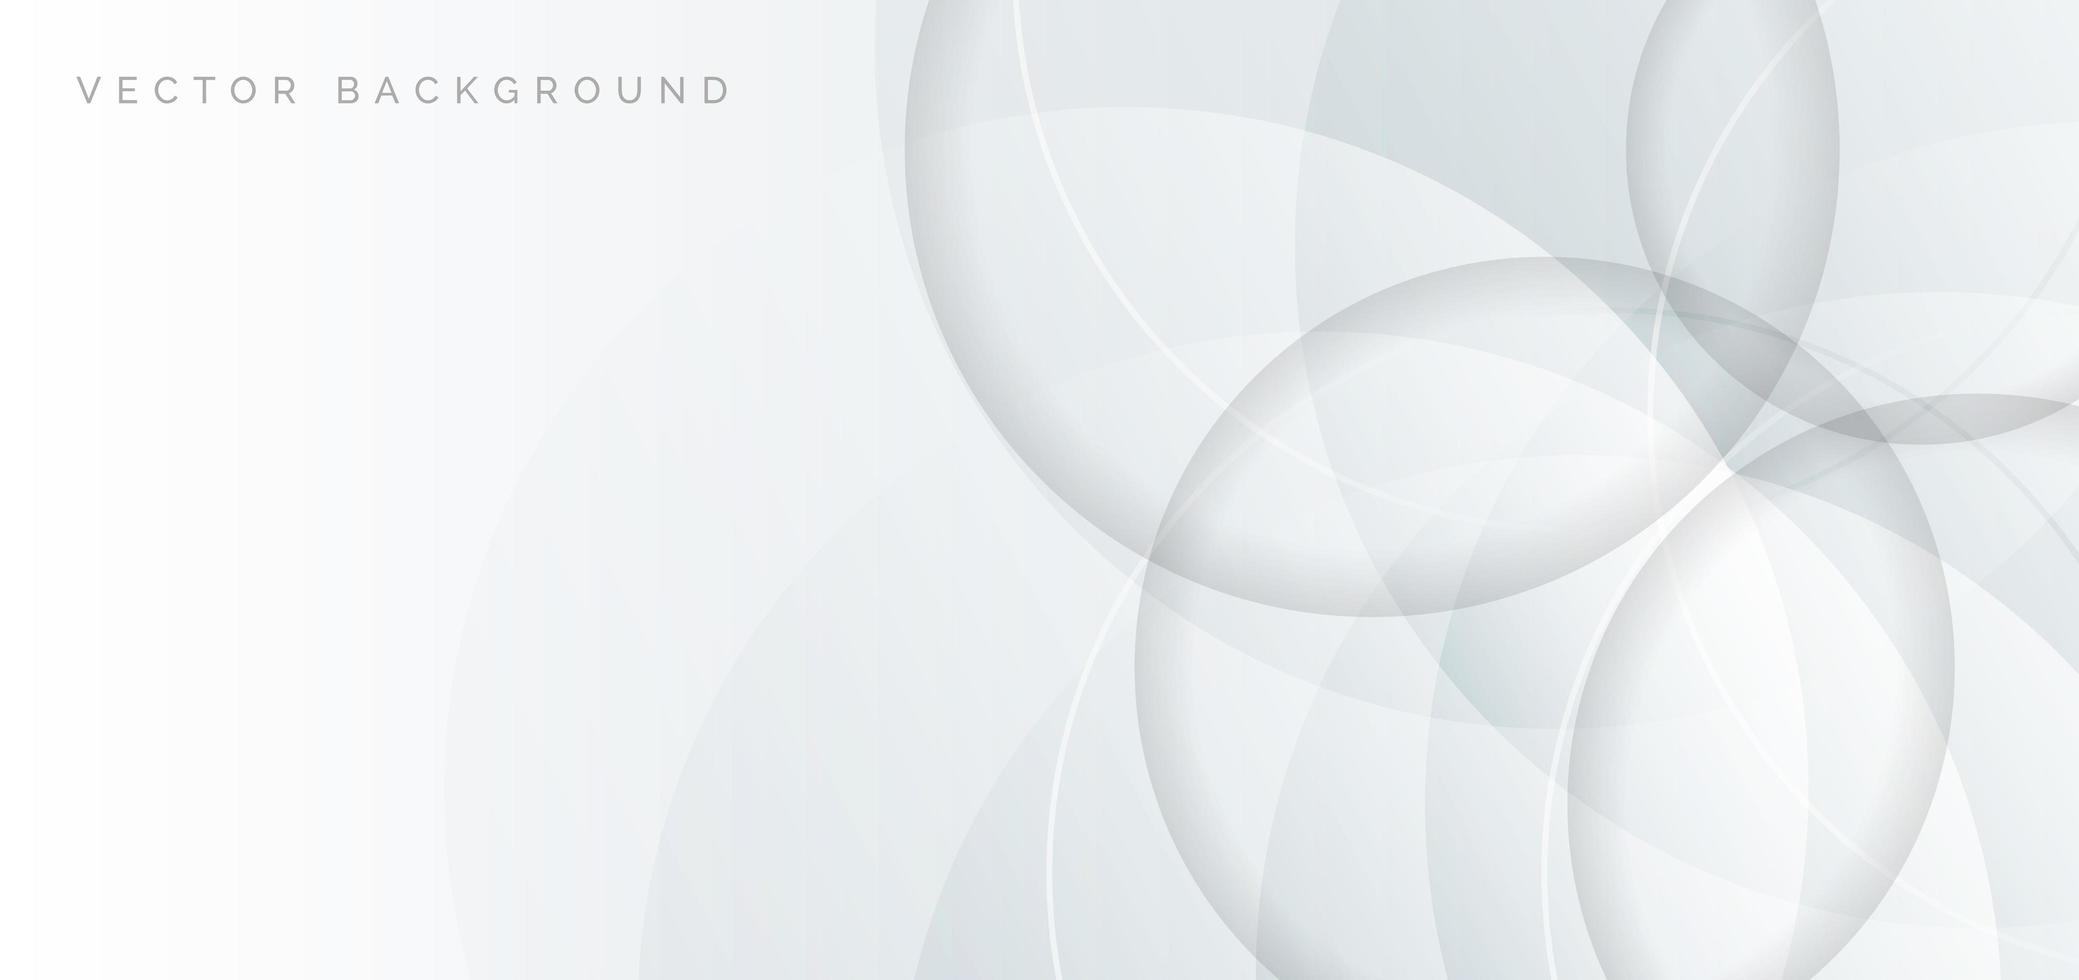 Abstract banner with white and grey circles vector